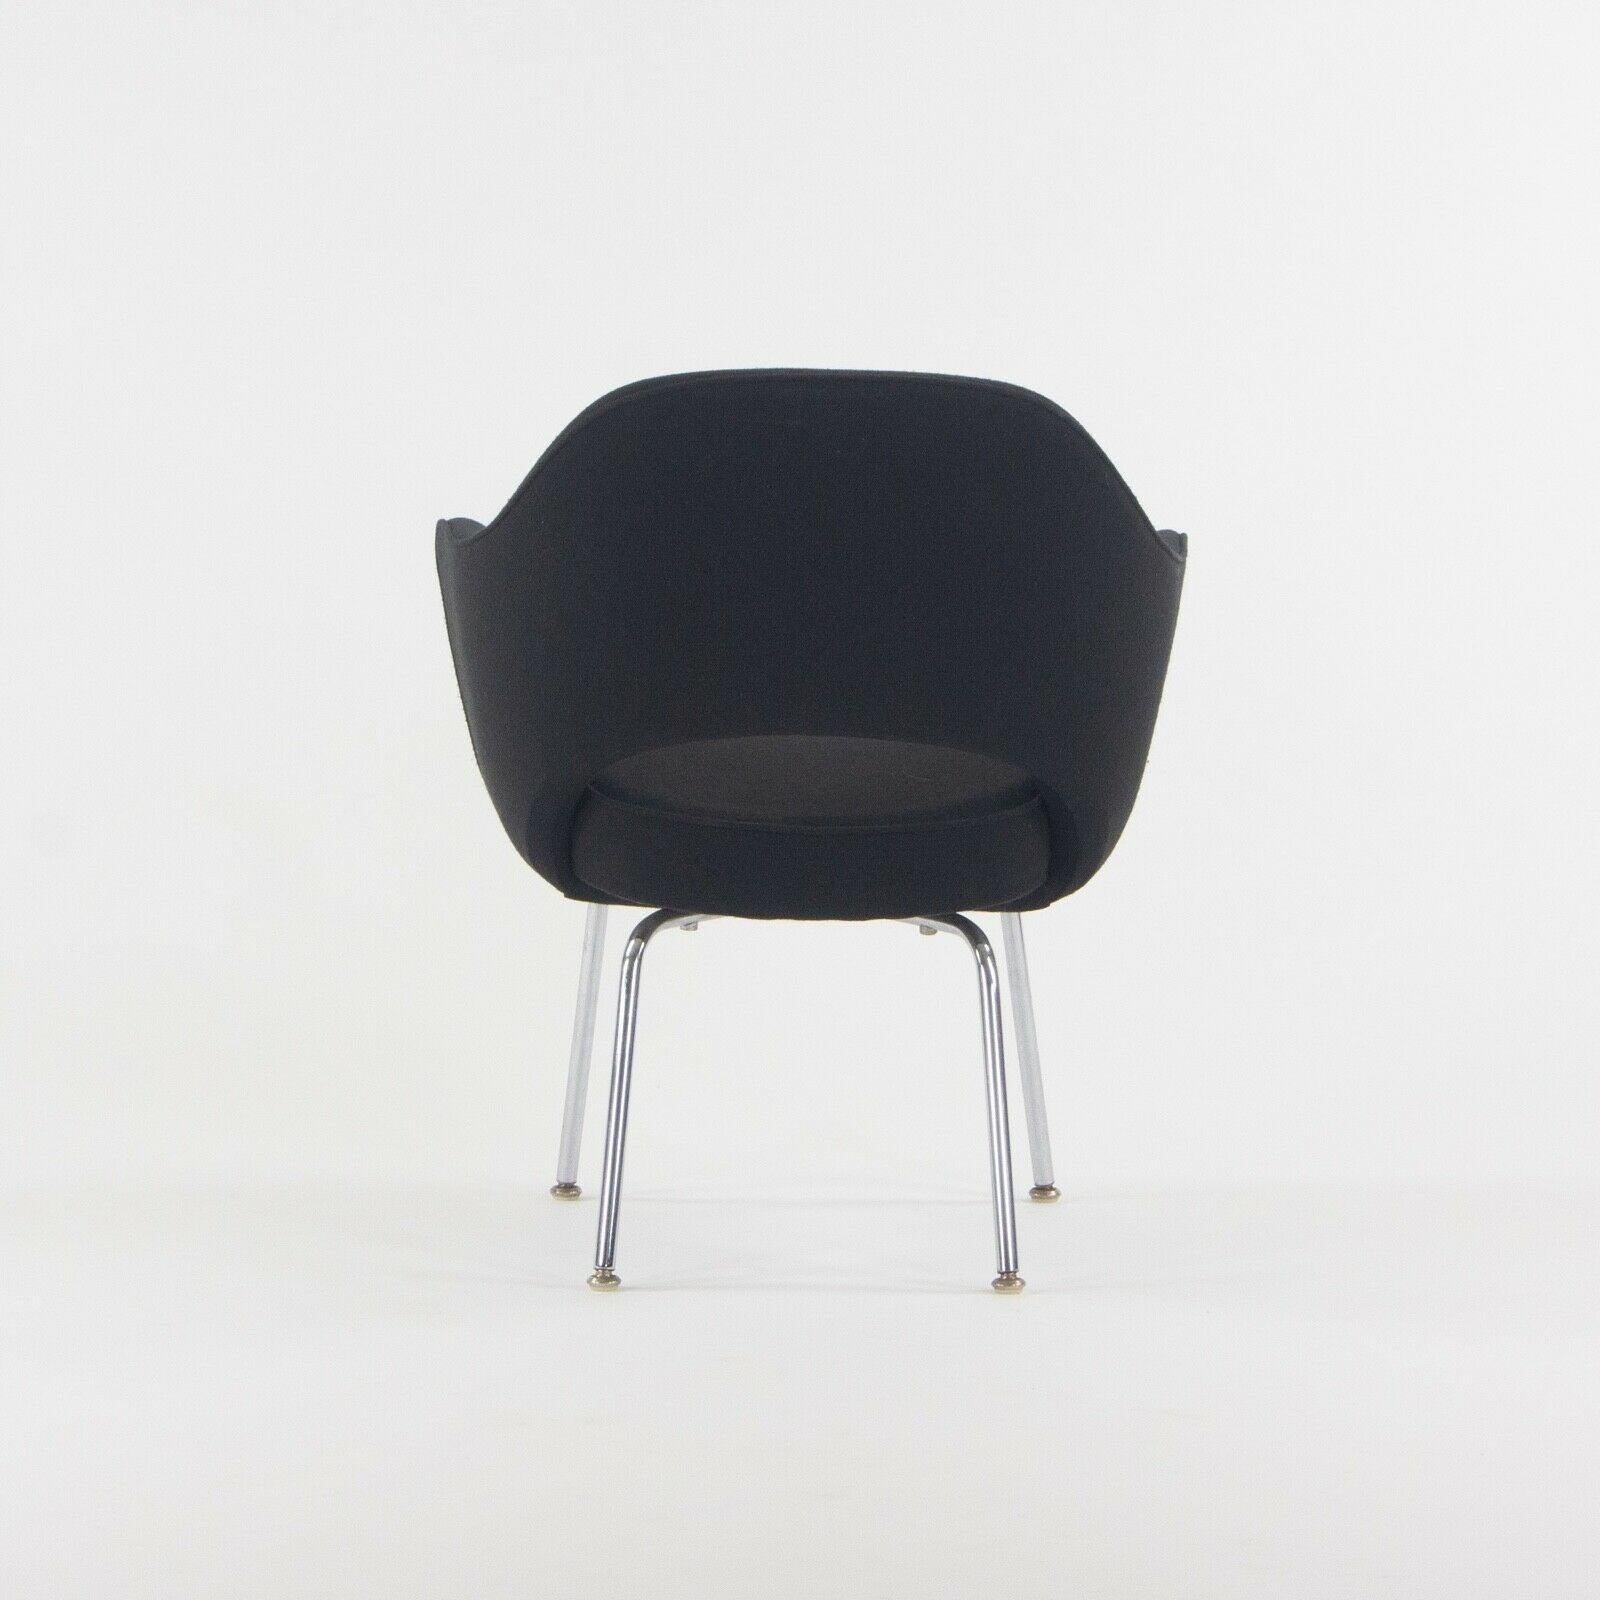 1960s Eero Saarinen Knoll International Black Fabric Executive Arm Dining Chair In Good Condition For Sale In Philadelphia, PA